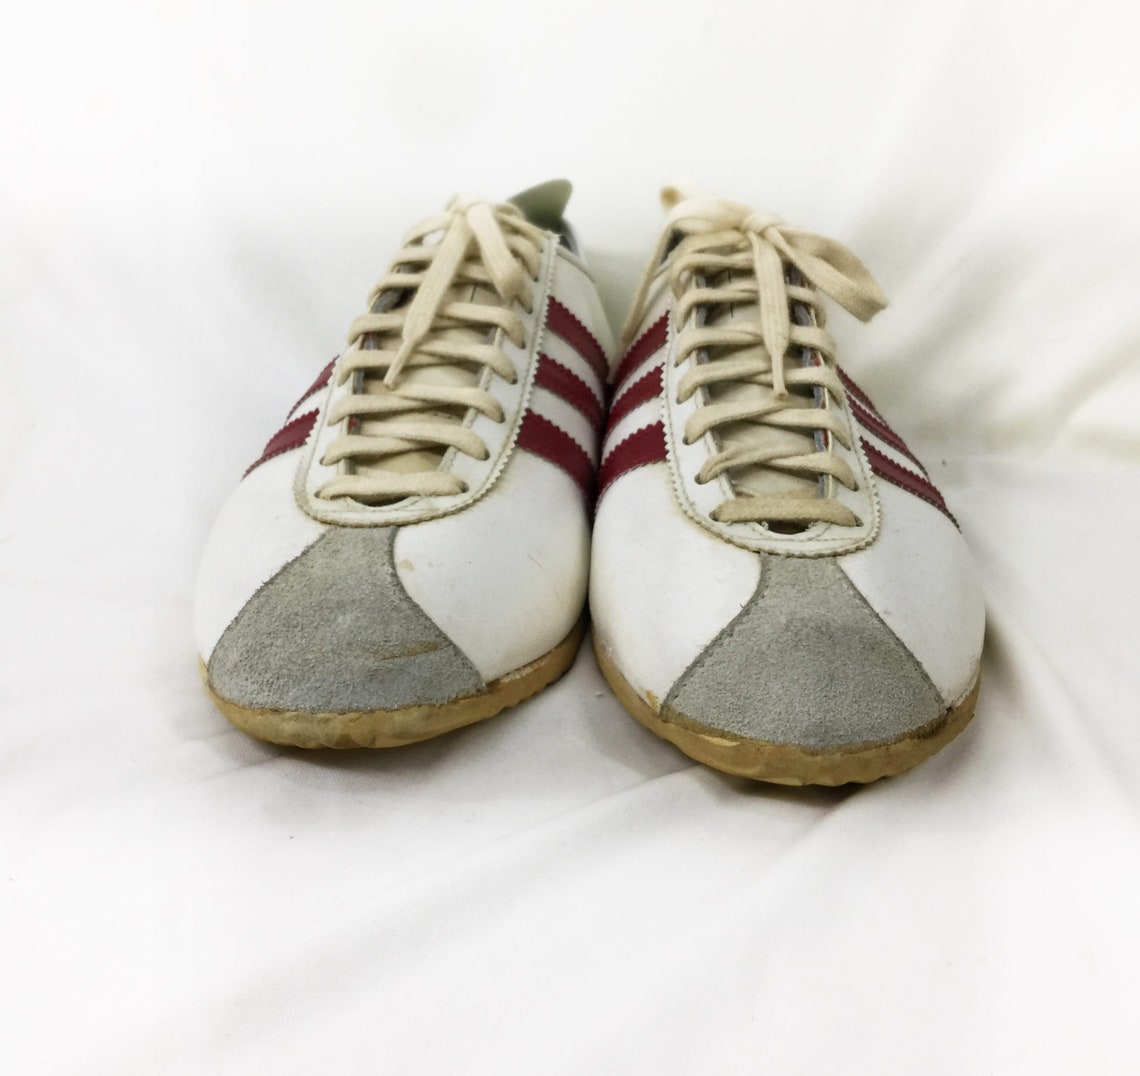 Super Rare 60s 70s Vintage Adidas Vienna shoes made in western | Etsy